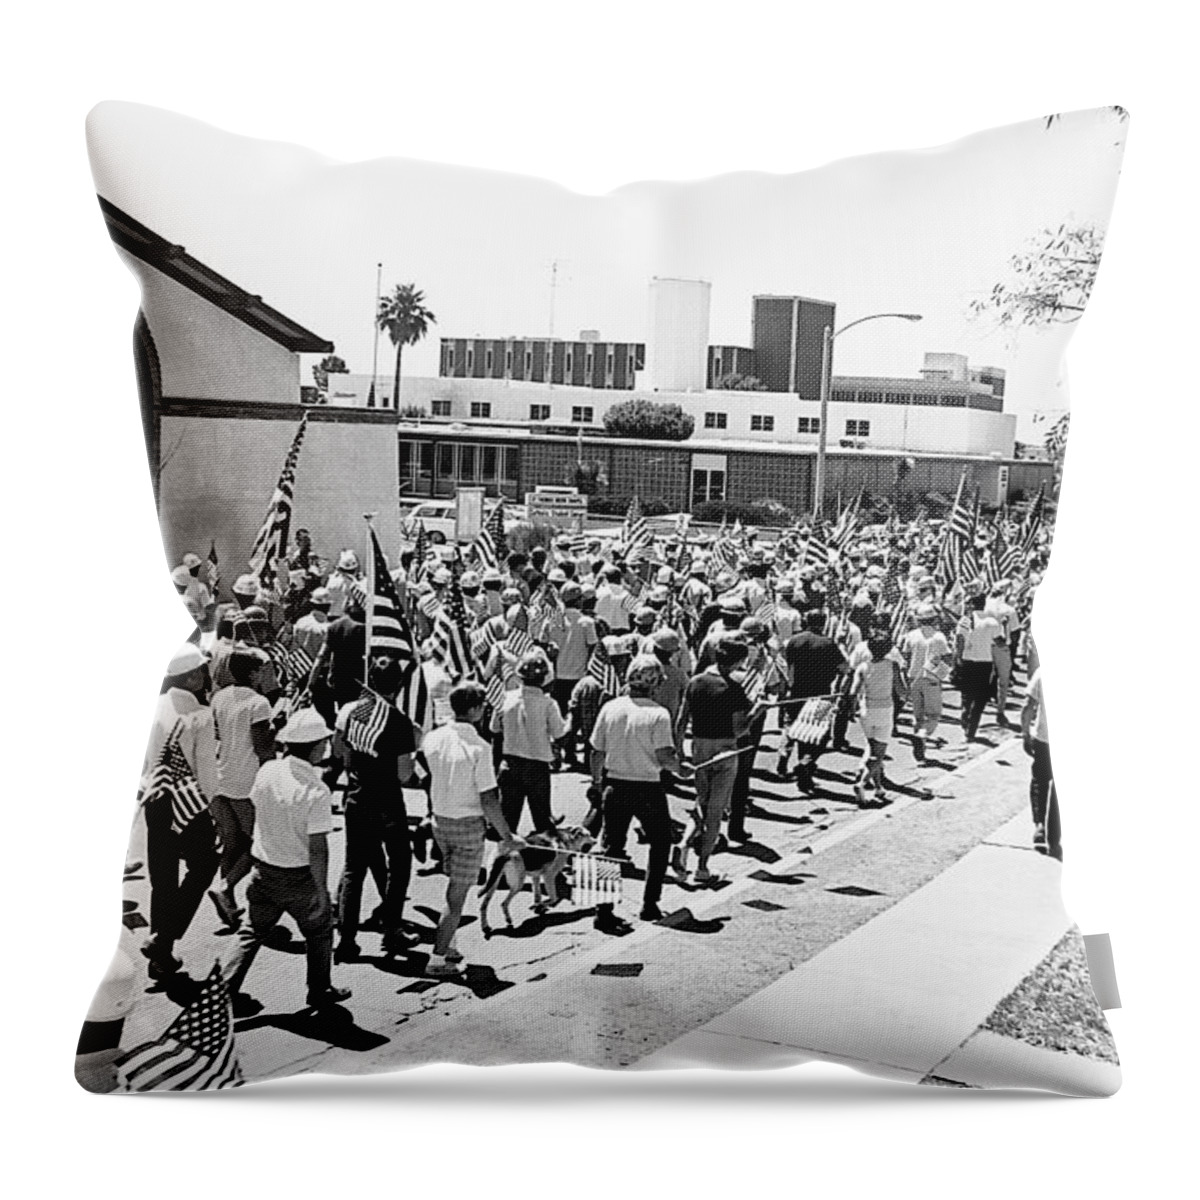 Reverse Angle Pro Viet Nam War Marchers Tucson Arizona 1970 Throw Pillow featuring the photograph Reverse angle Pro Viet Nam War marchers Tucson Arizona 1970 by David Lee Guss